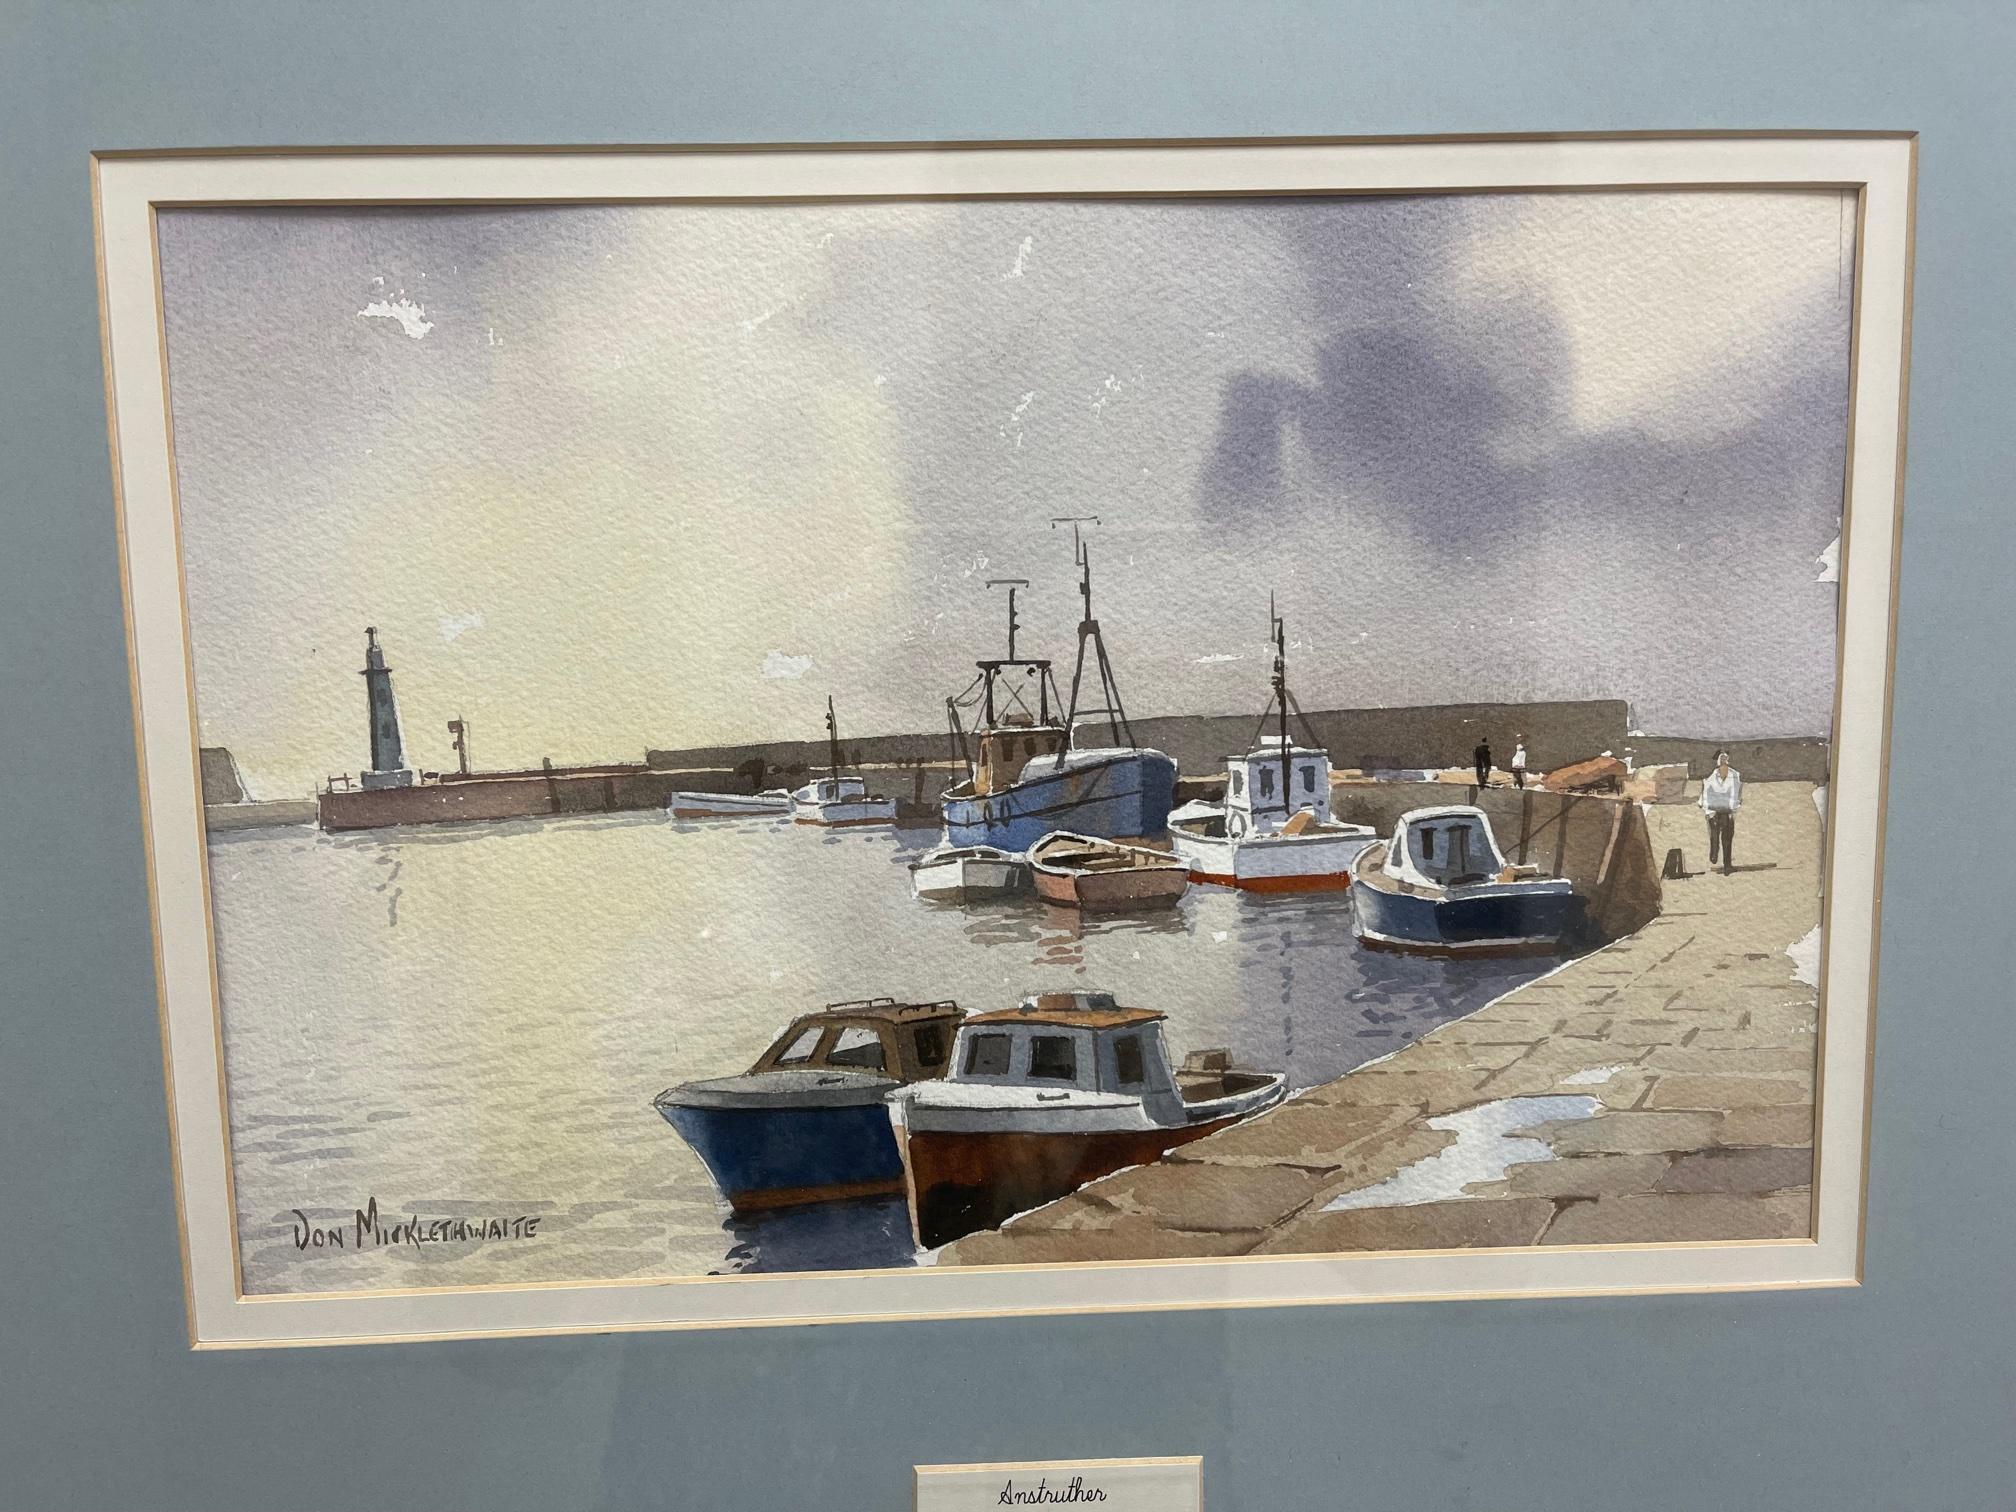 Watercolor on paper, signed Don Micklethwaite on recto (bottom left), framed size 26”l x 22”w x 1”d; unframed size 14” x 9”. Boats in a Harbour at Low Tide. British Artist Don Micklethwaite born in Scarborough and received a short formal training at